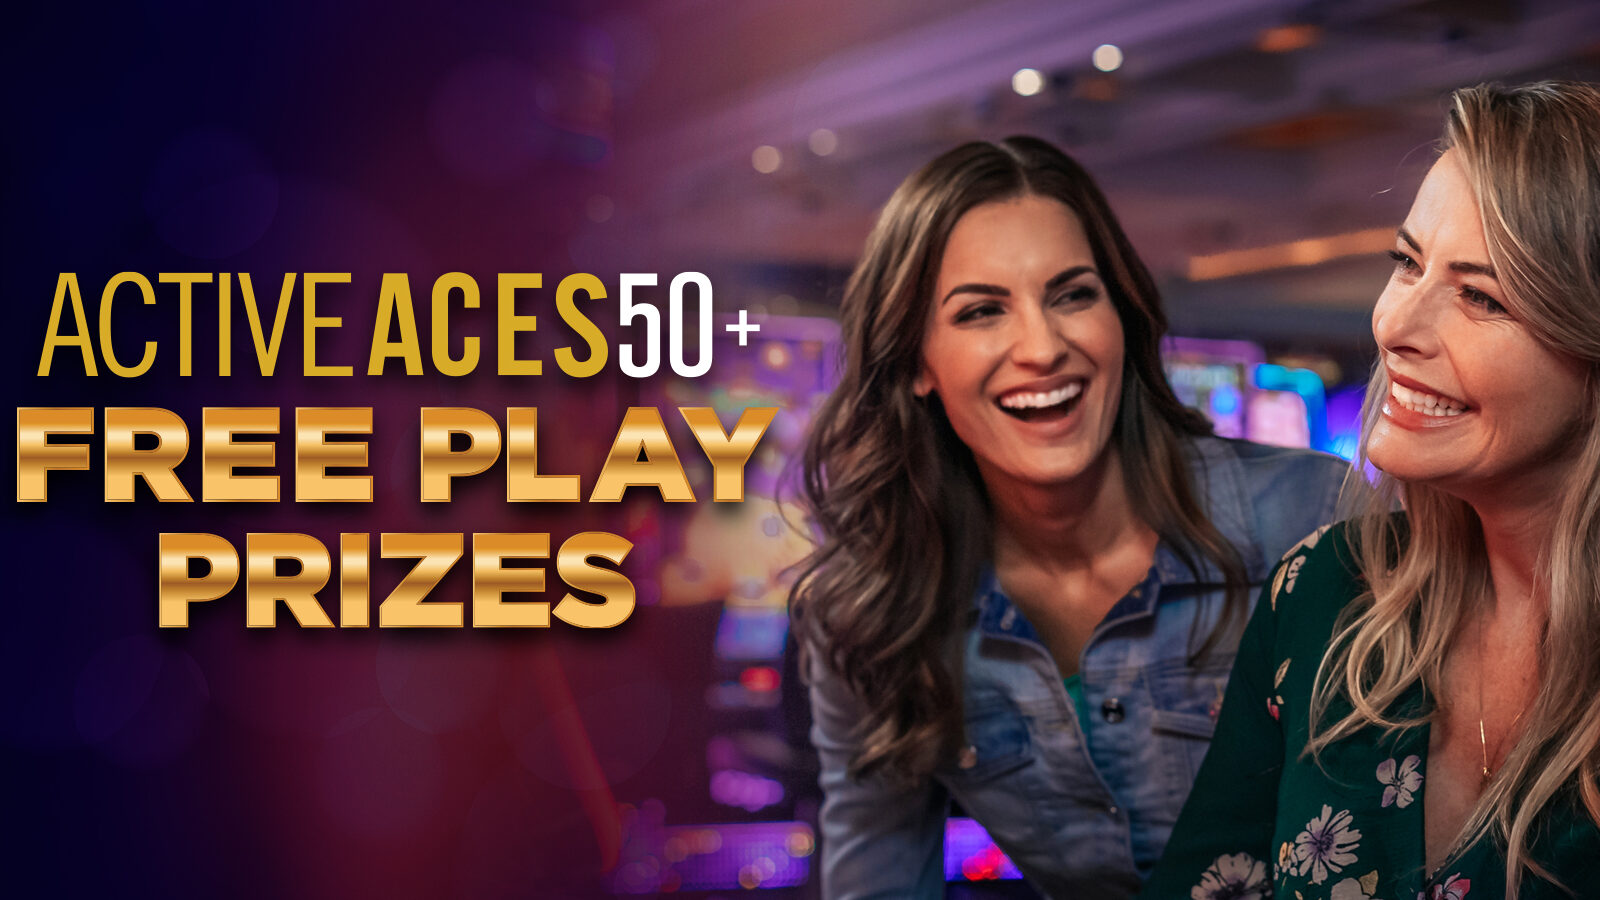 Active ACES Free Play Prizes